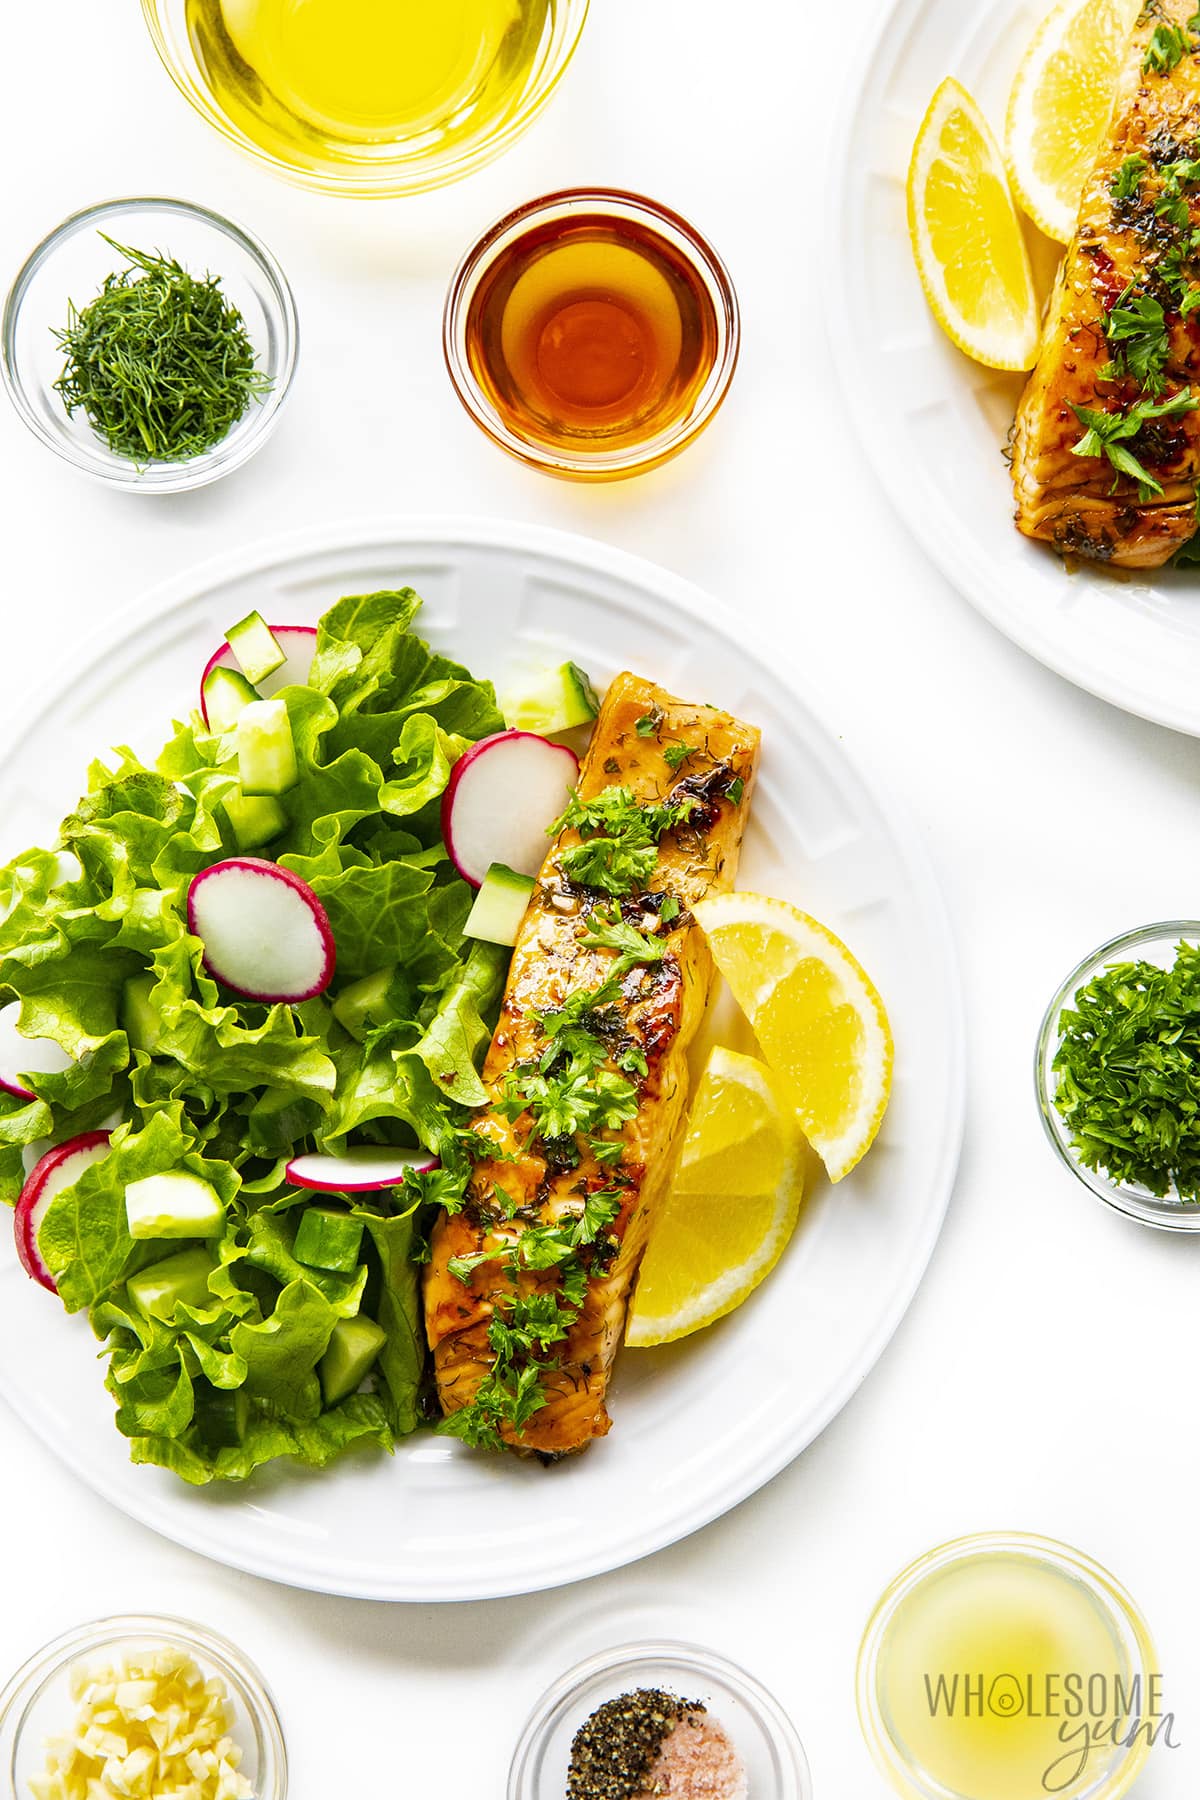 The best salmon marinade is on the plate after cooking with the salad.